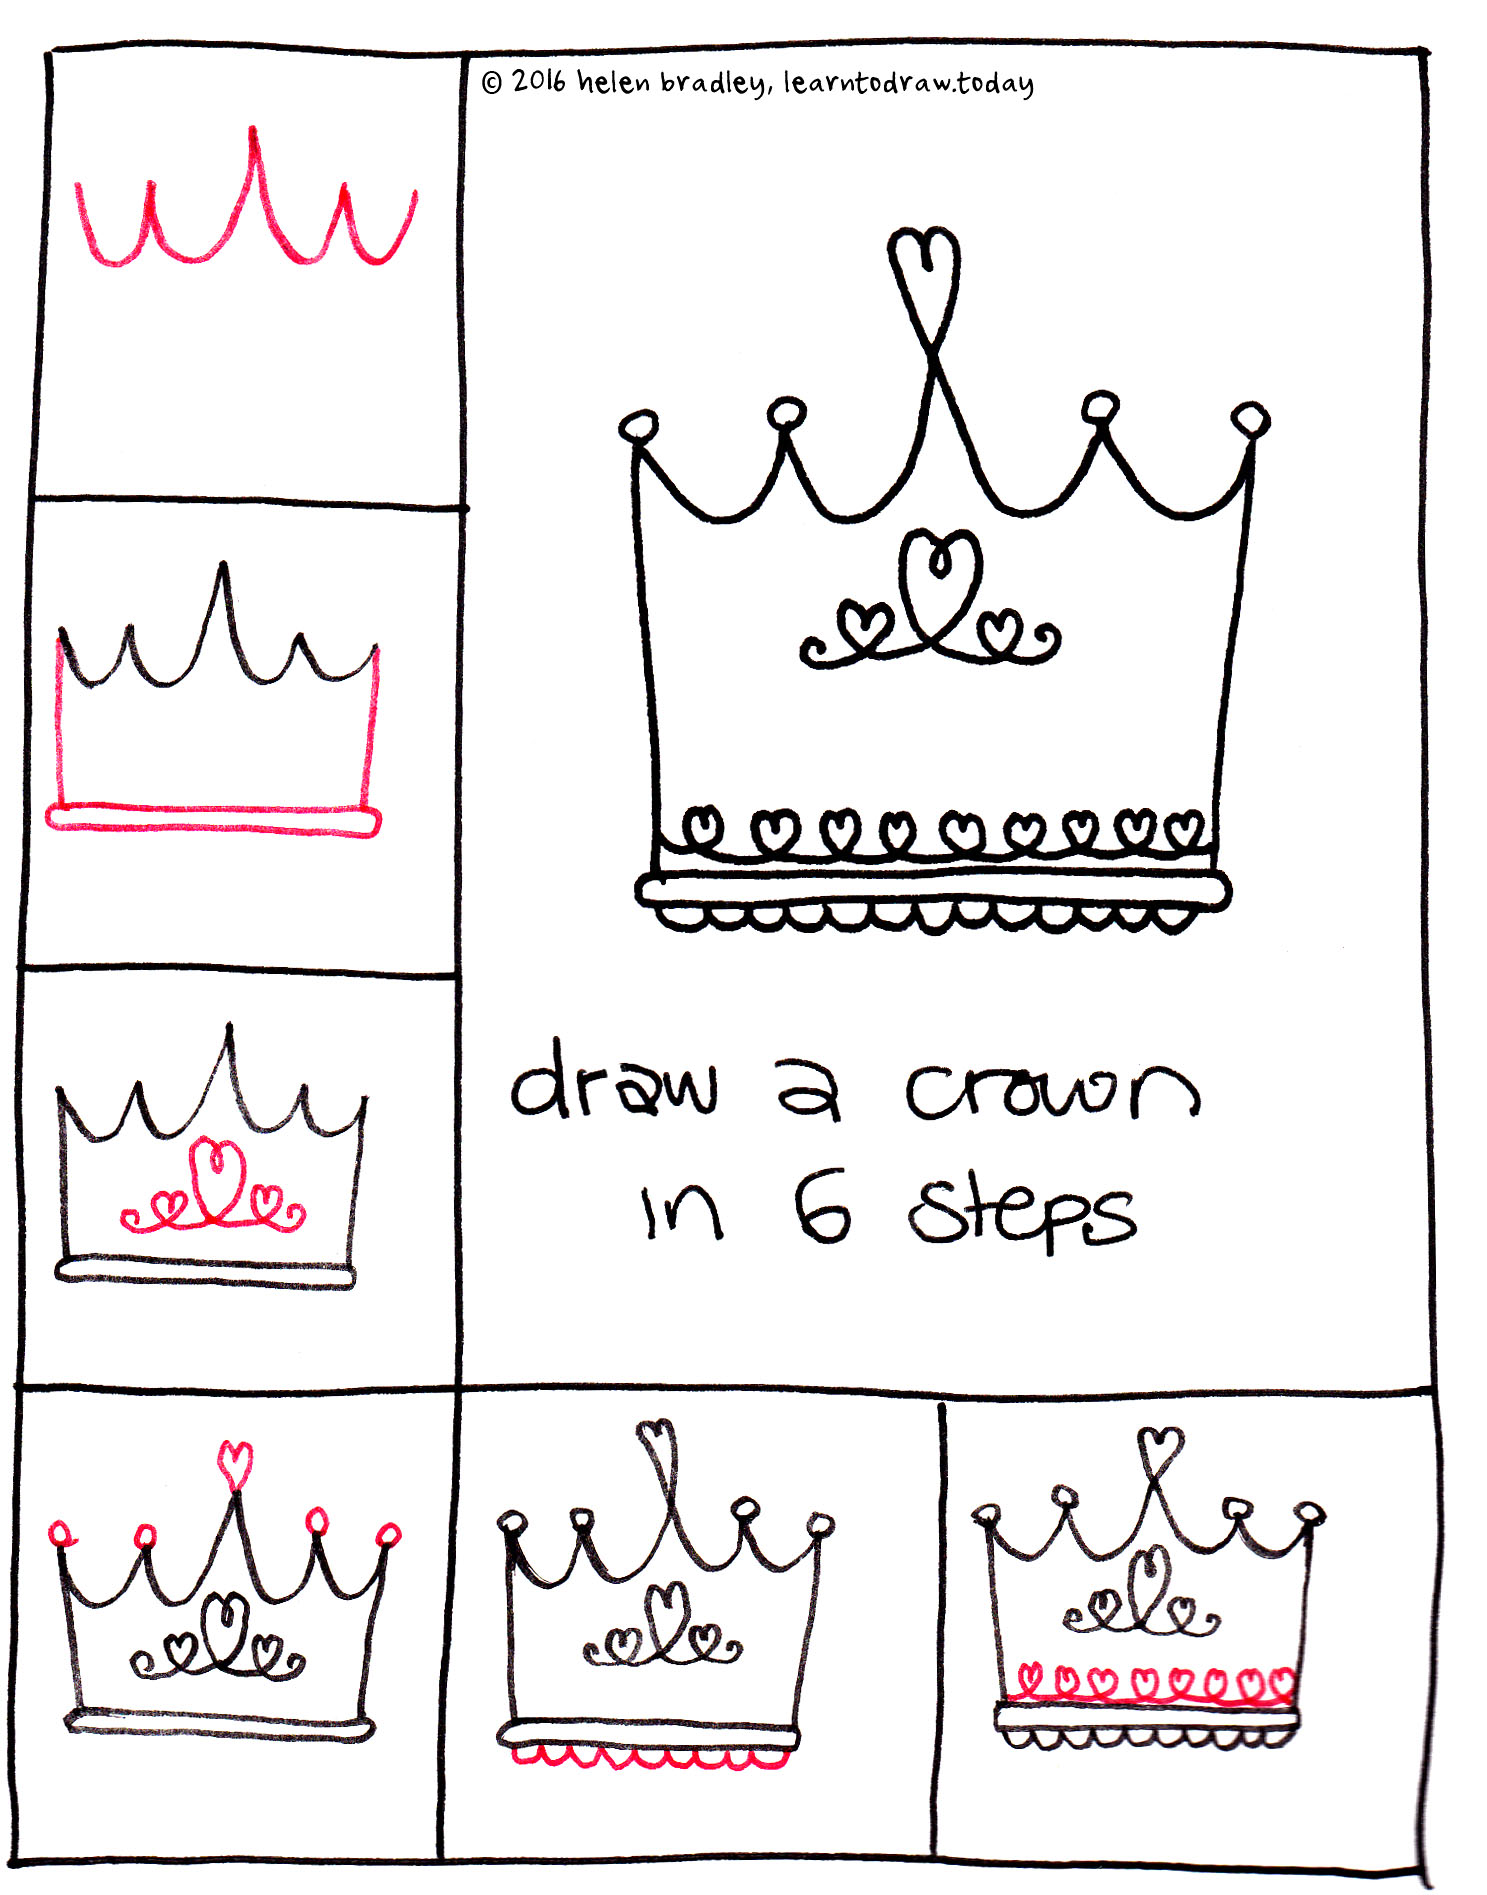 How To Draw A Princess Crown Step By Step Do not about the